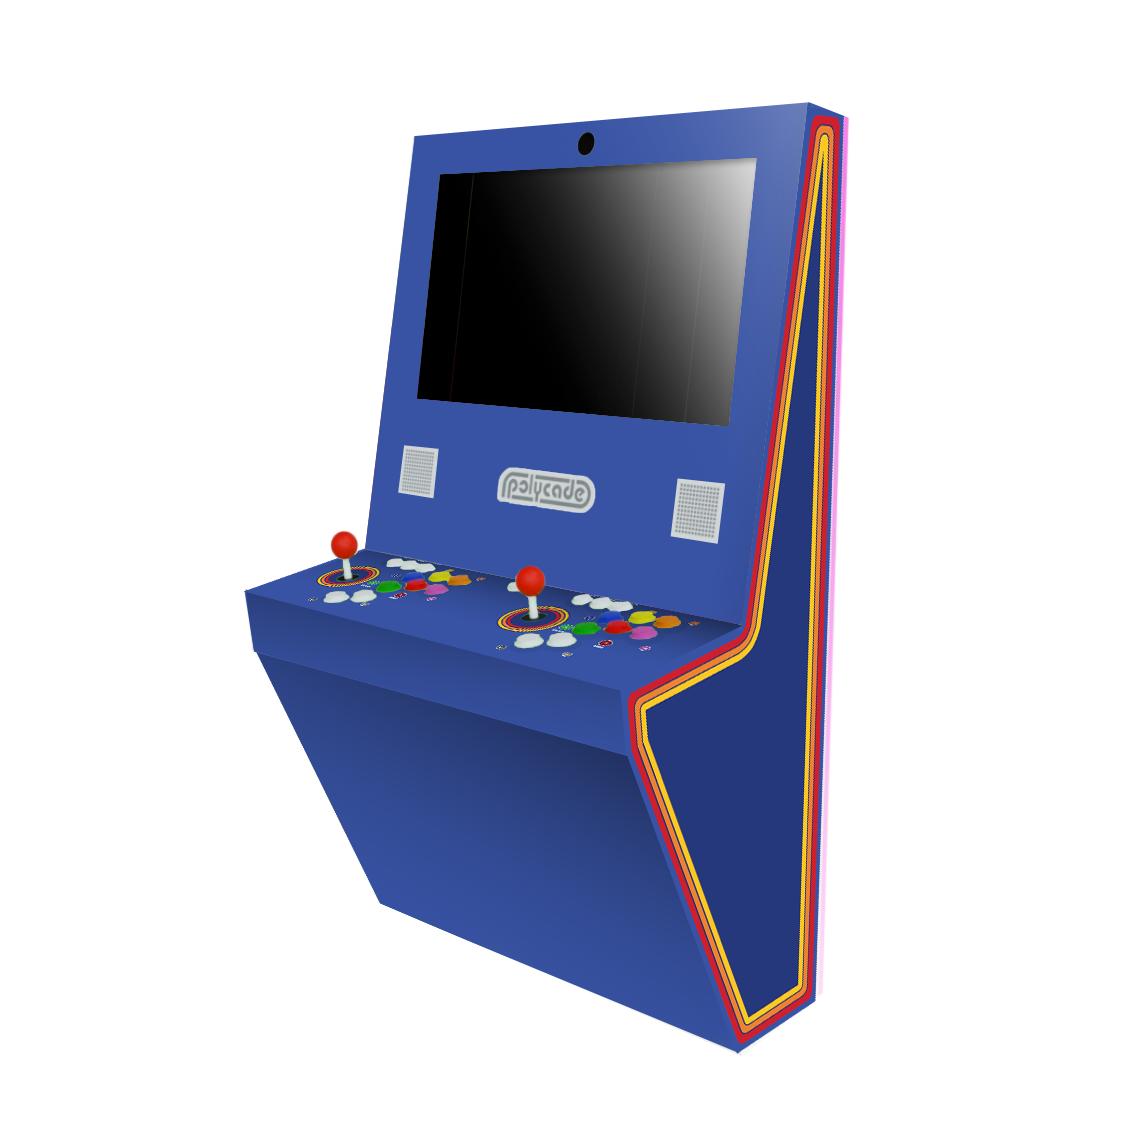 Magnetic Decal - Polycade Classic